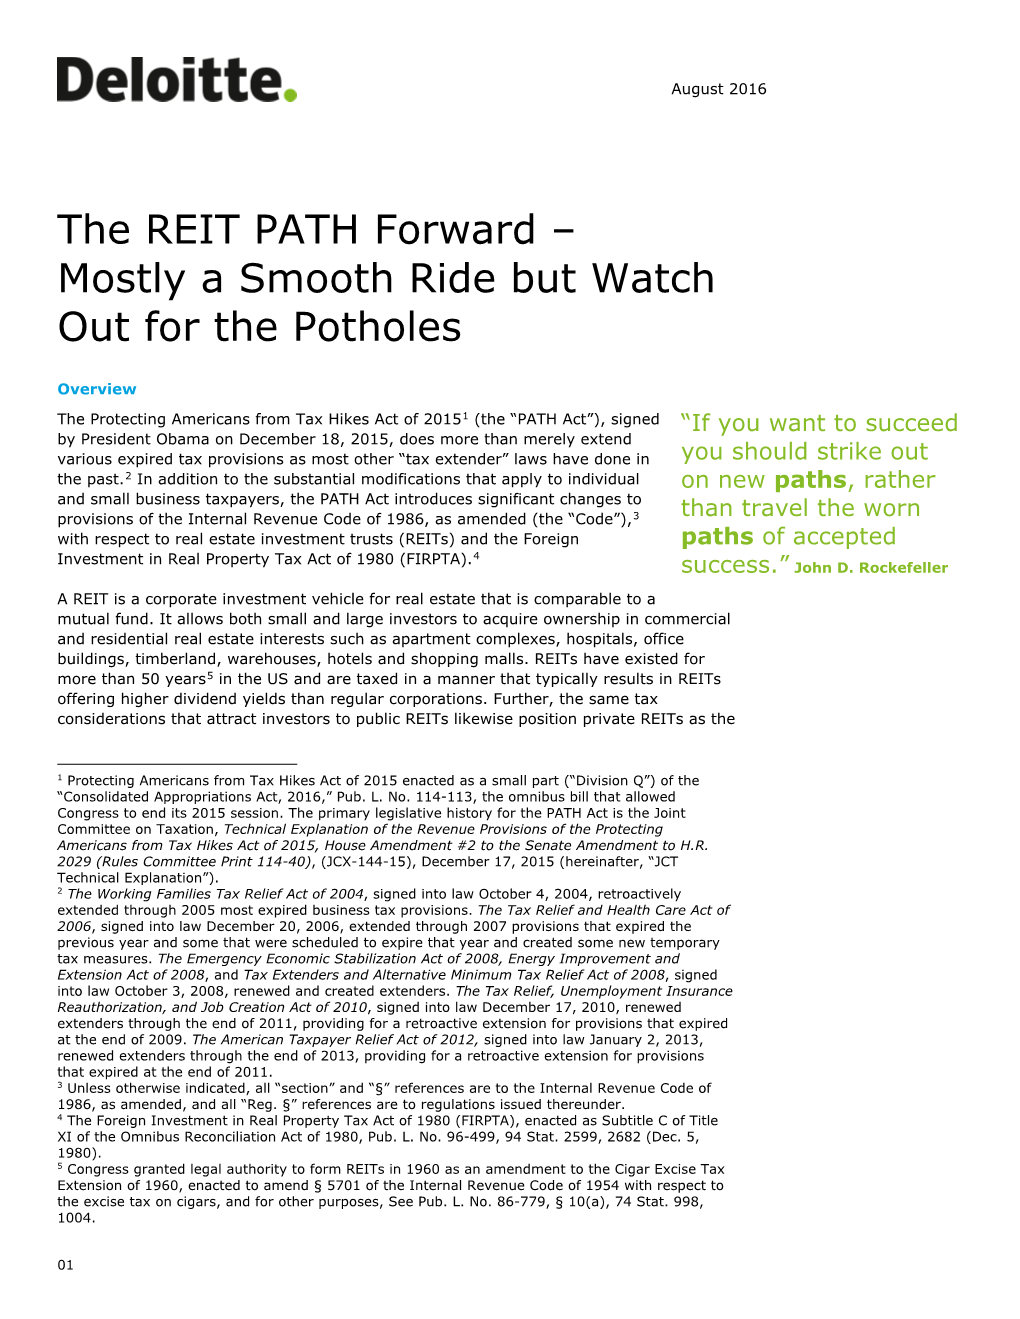 The REIT PATH Forward – Mostly a Smooth Ride but Watch out for the Potholes